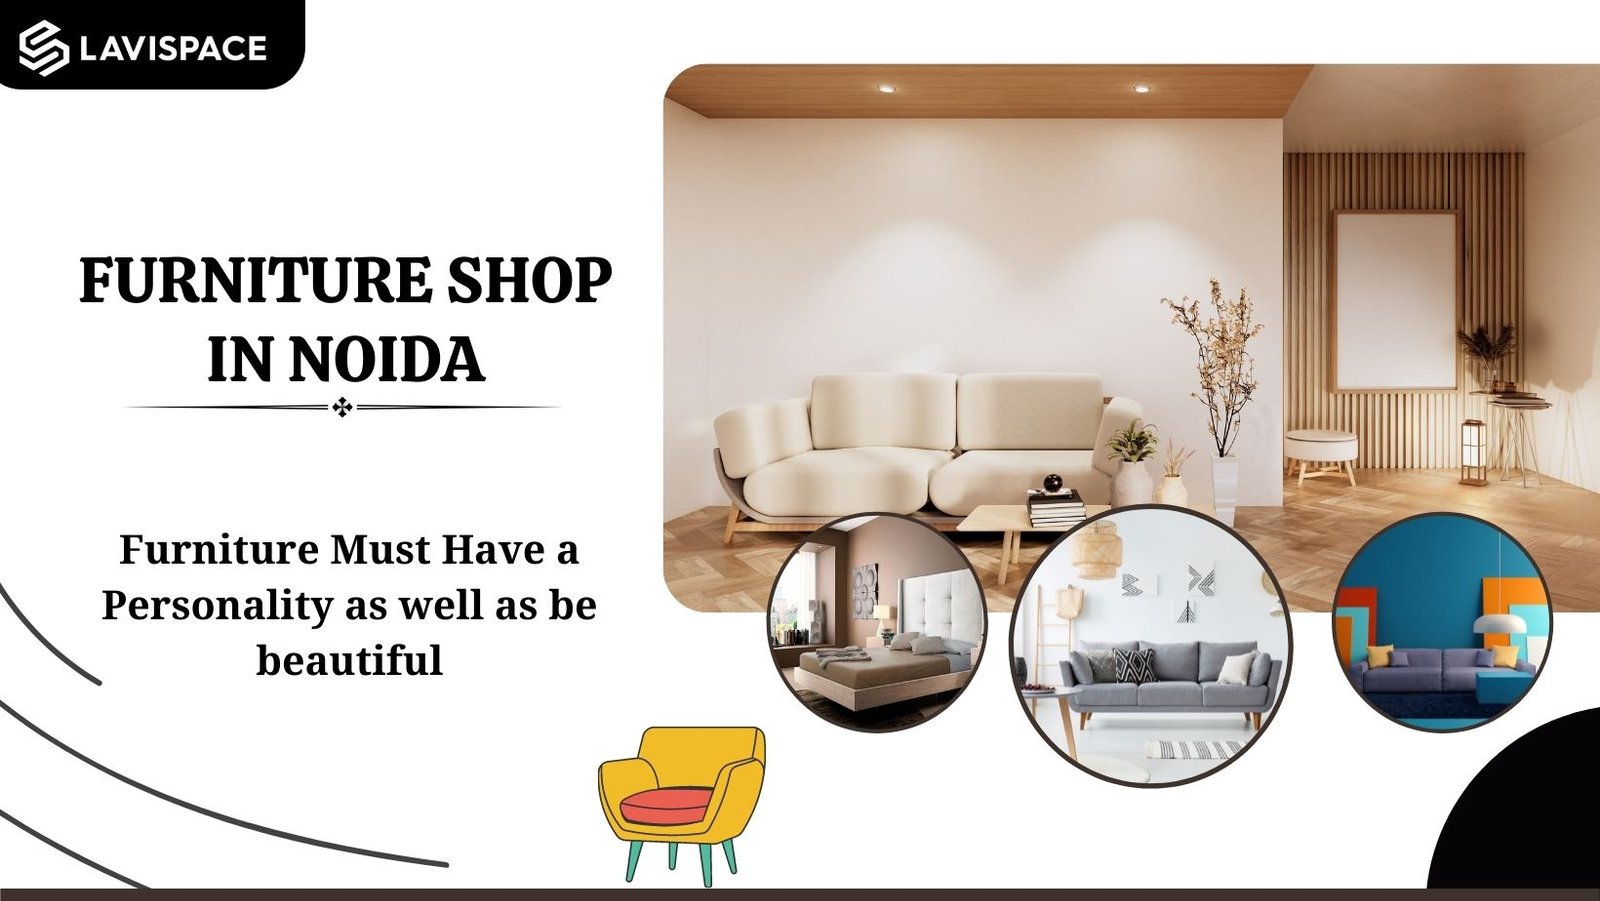 You are currently viewing Furniture Shop in Noida | Lavispace